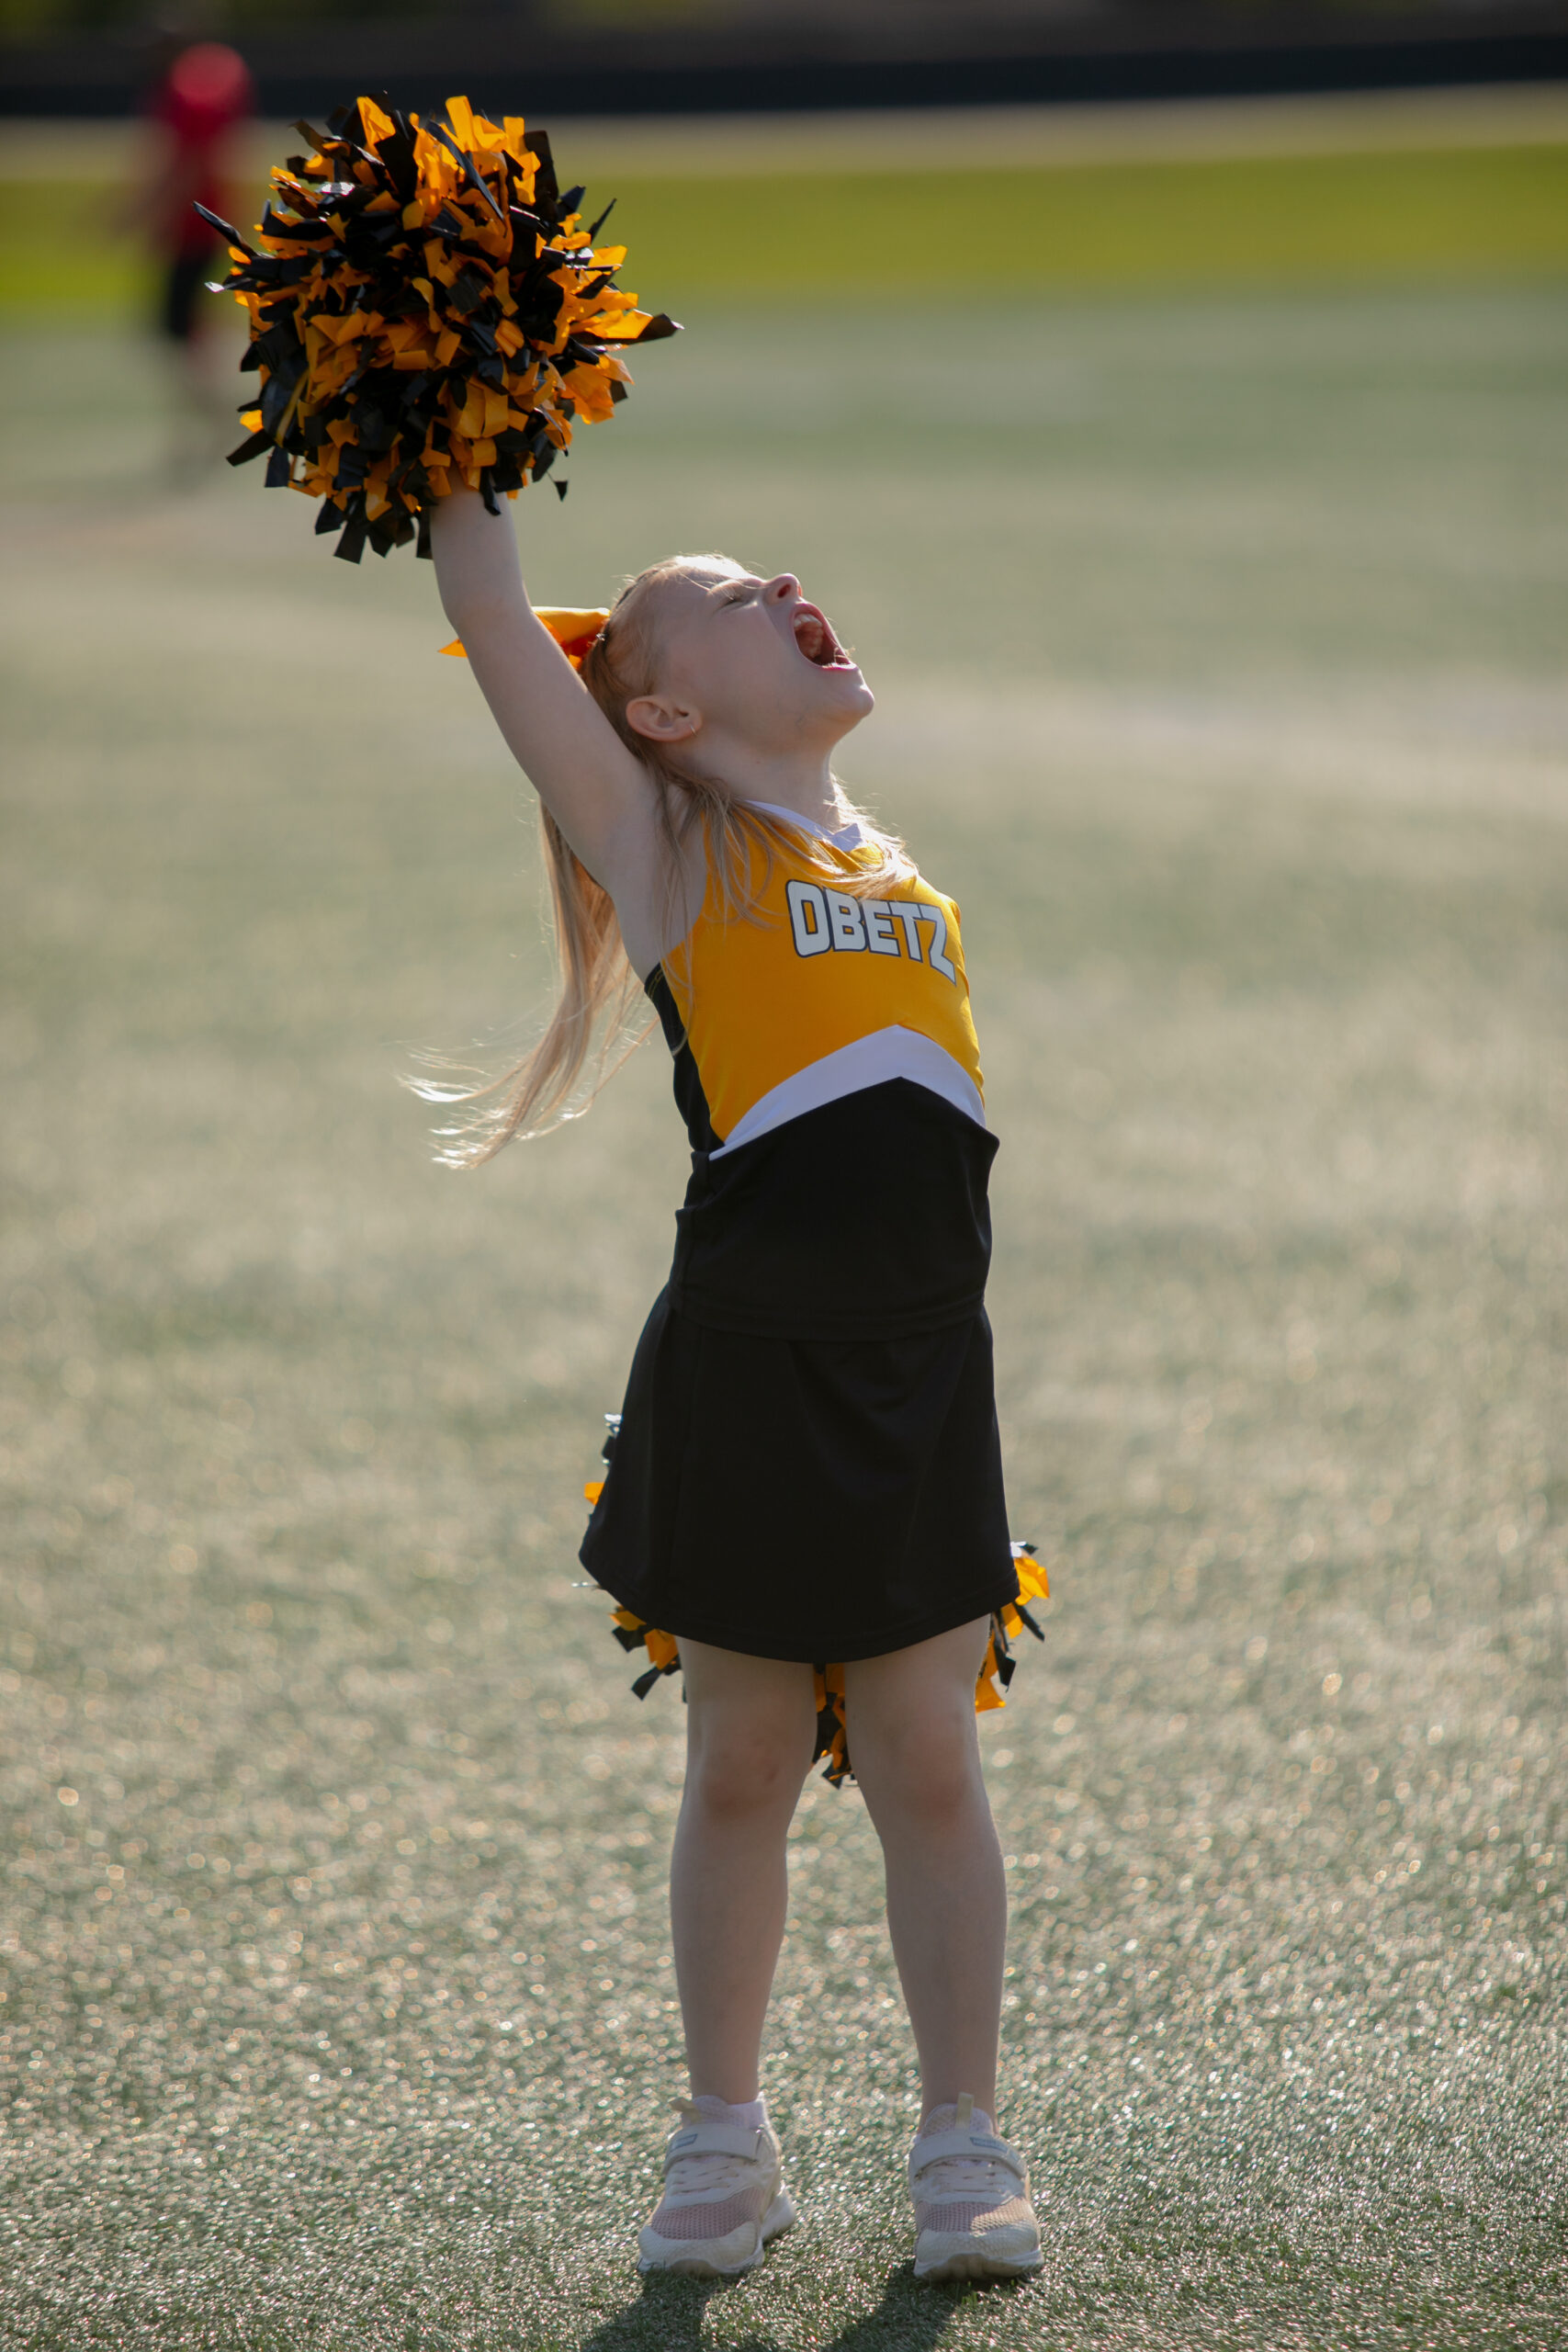 Obetz Youth Football & Cheer - City of Obetz